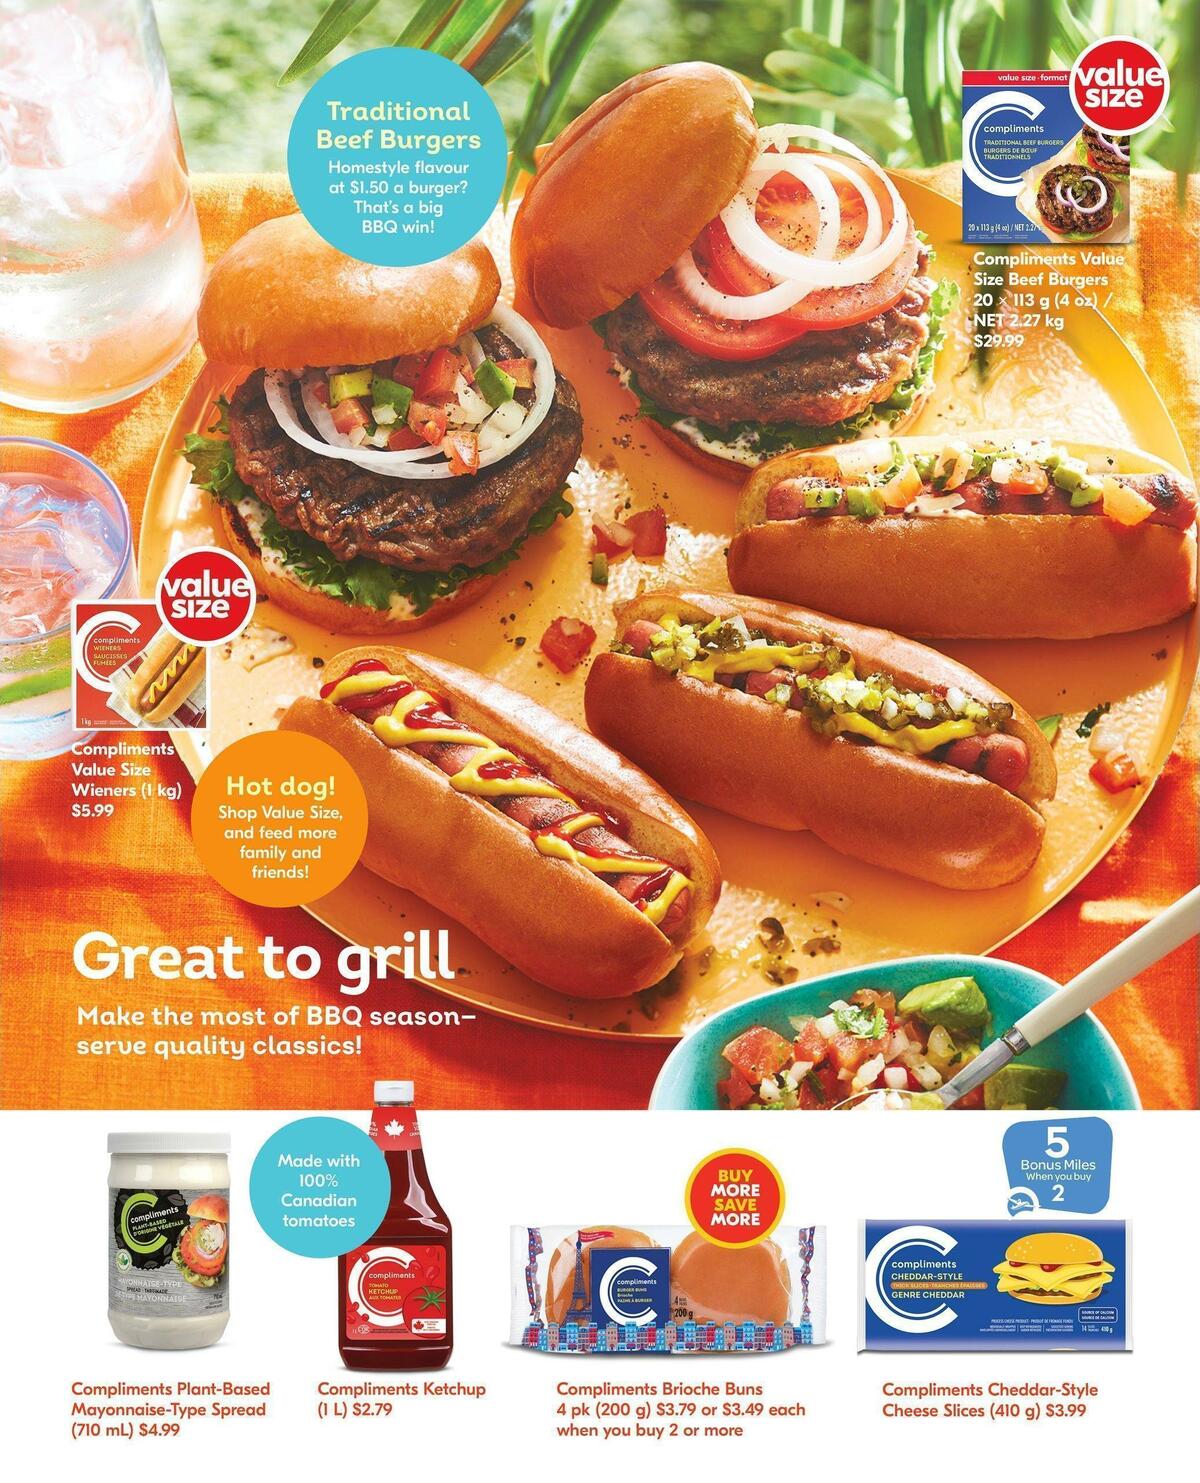 Sobeys Summer Compliments Flyer from June 9